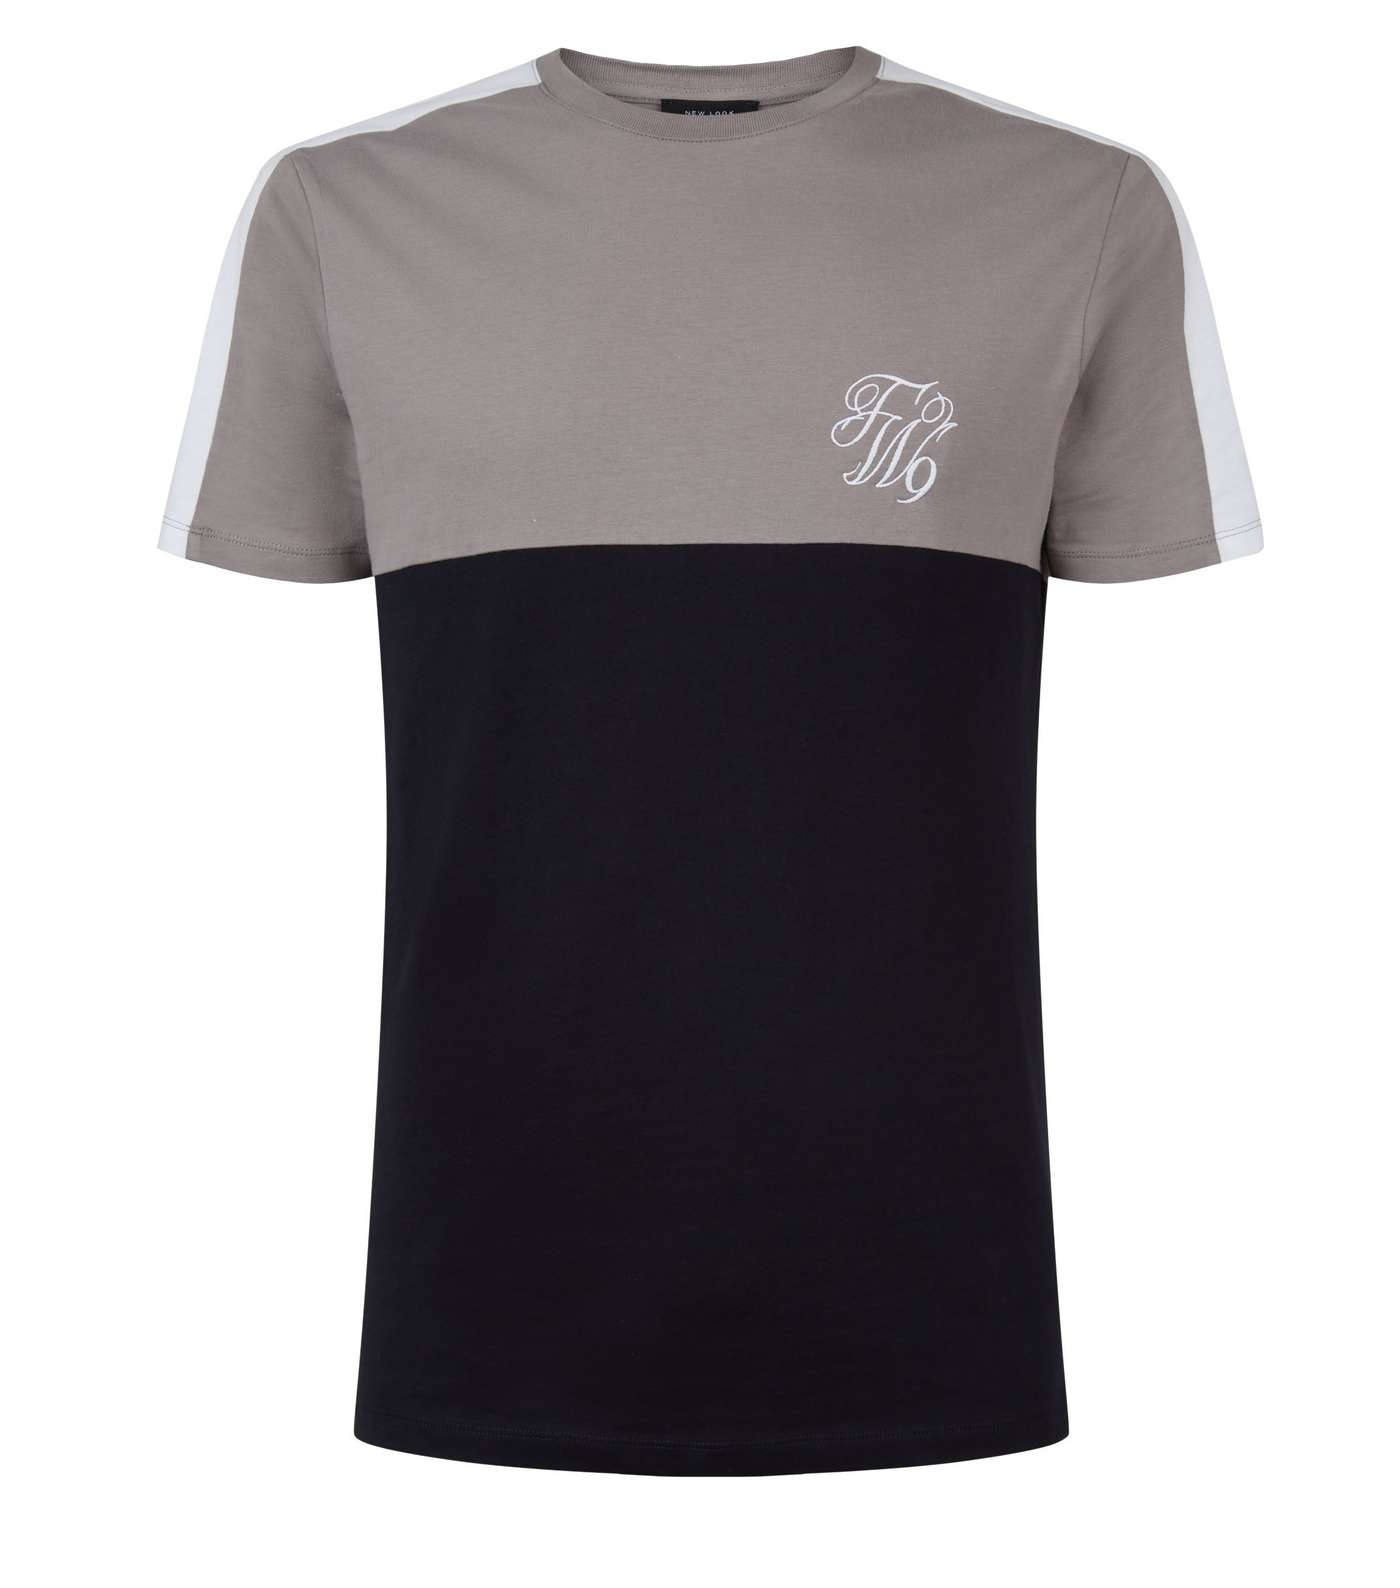 Pale Grey TW9 Embroidered Muscle Fit T-Shirt Image 4